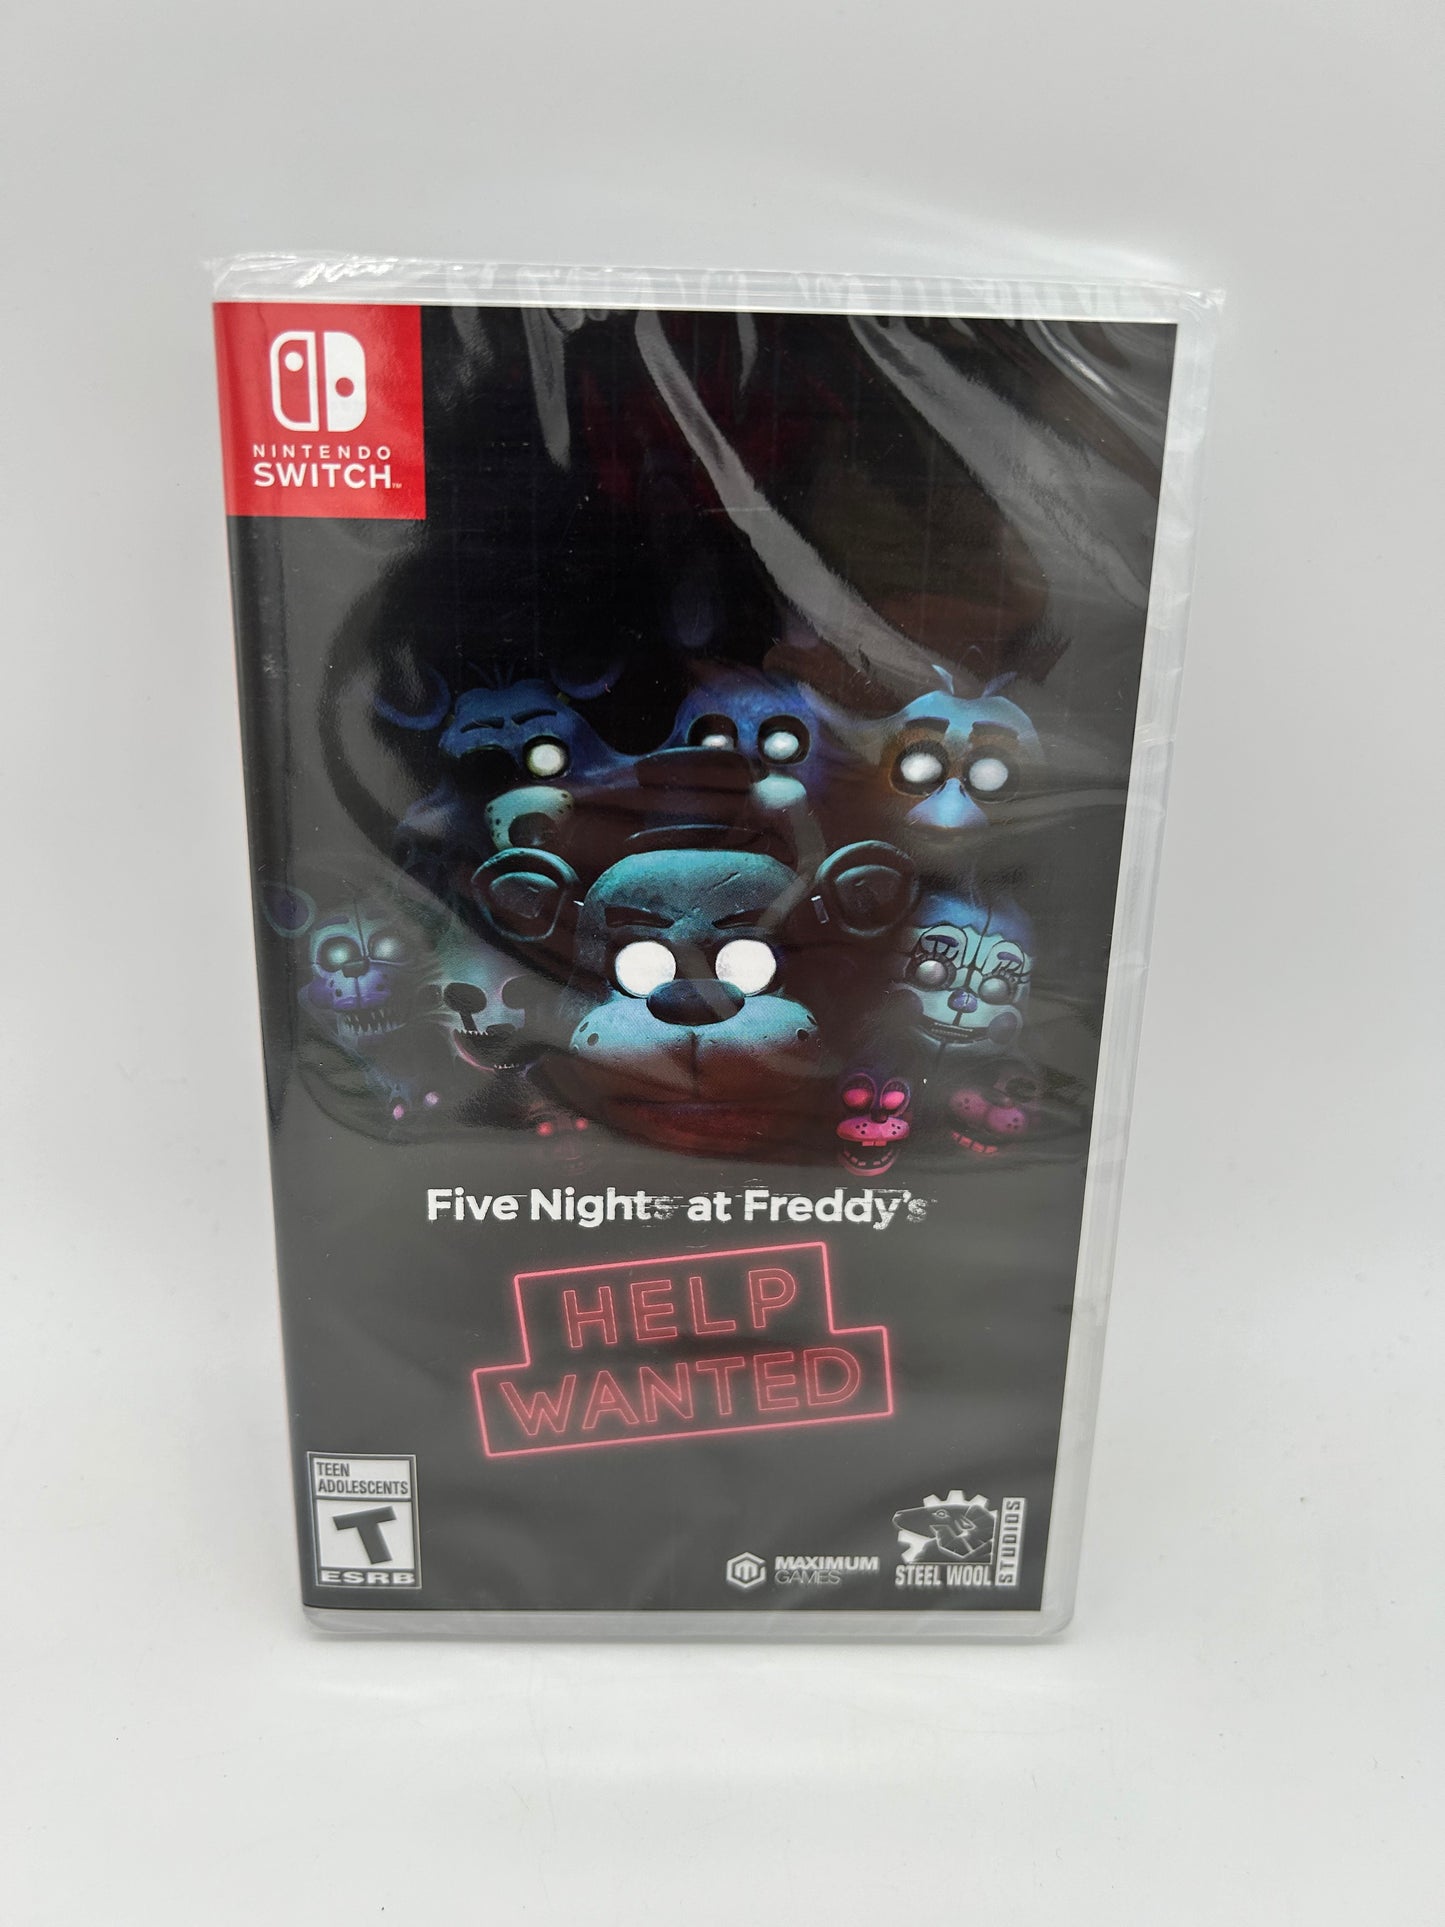 PiXEL-RETRO.COM : NINTENDO SWITCH NEW SEALED IN BOX COMPLETE MANUAL GAME NTSC FIVE NIGHTS AT FREDDY'S HELP WANTED